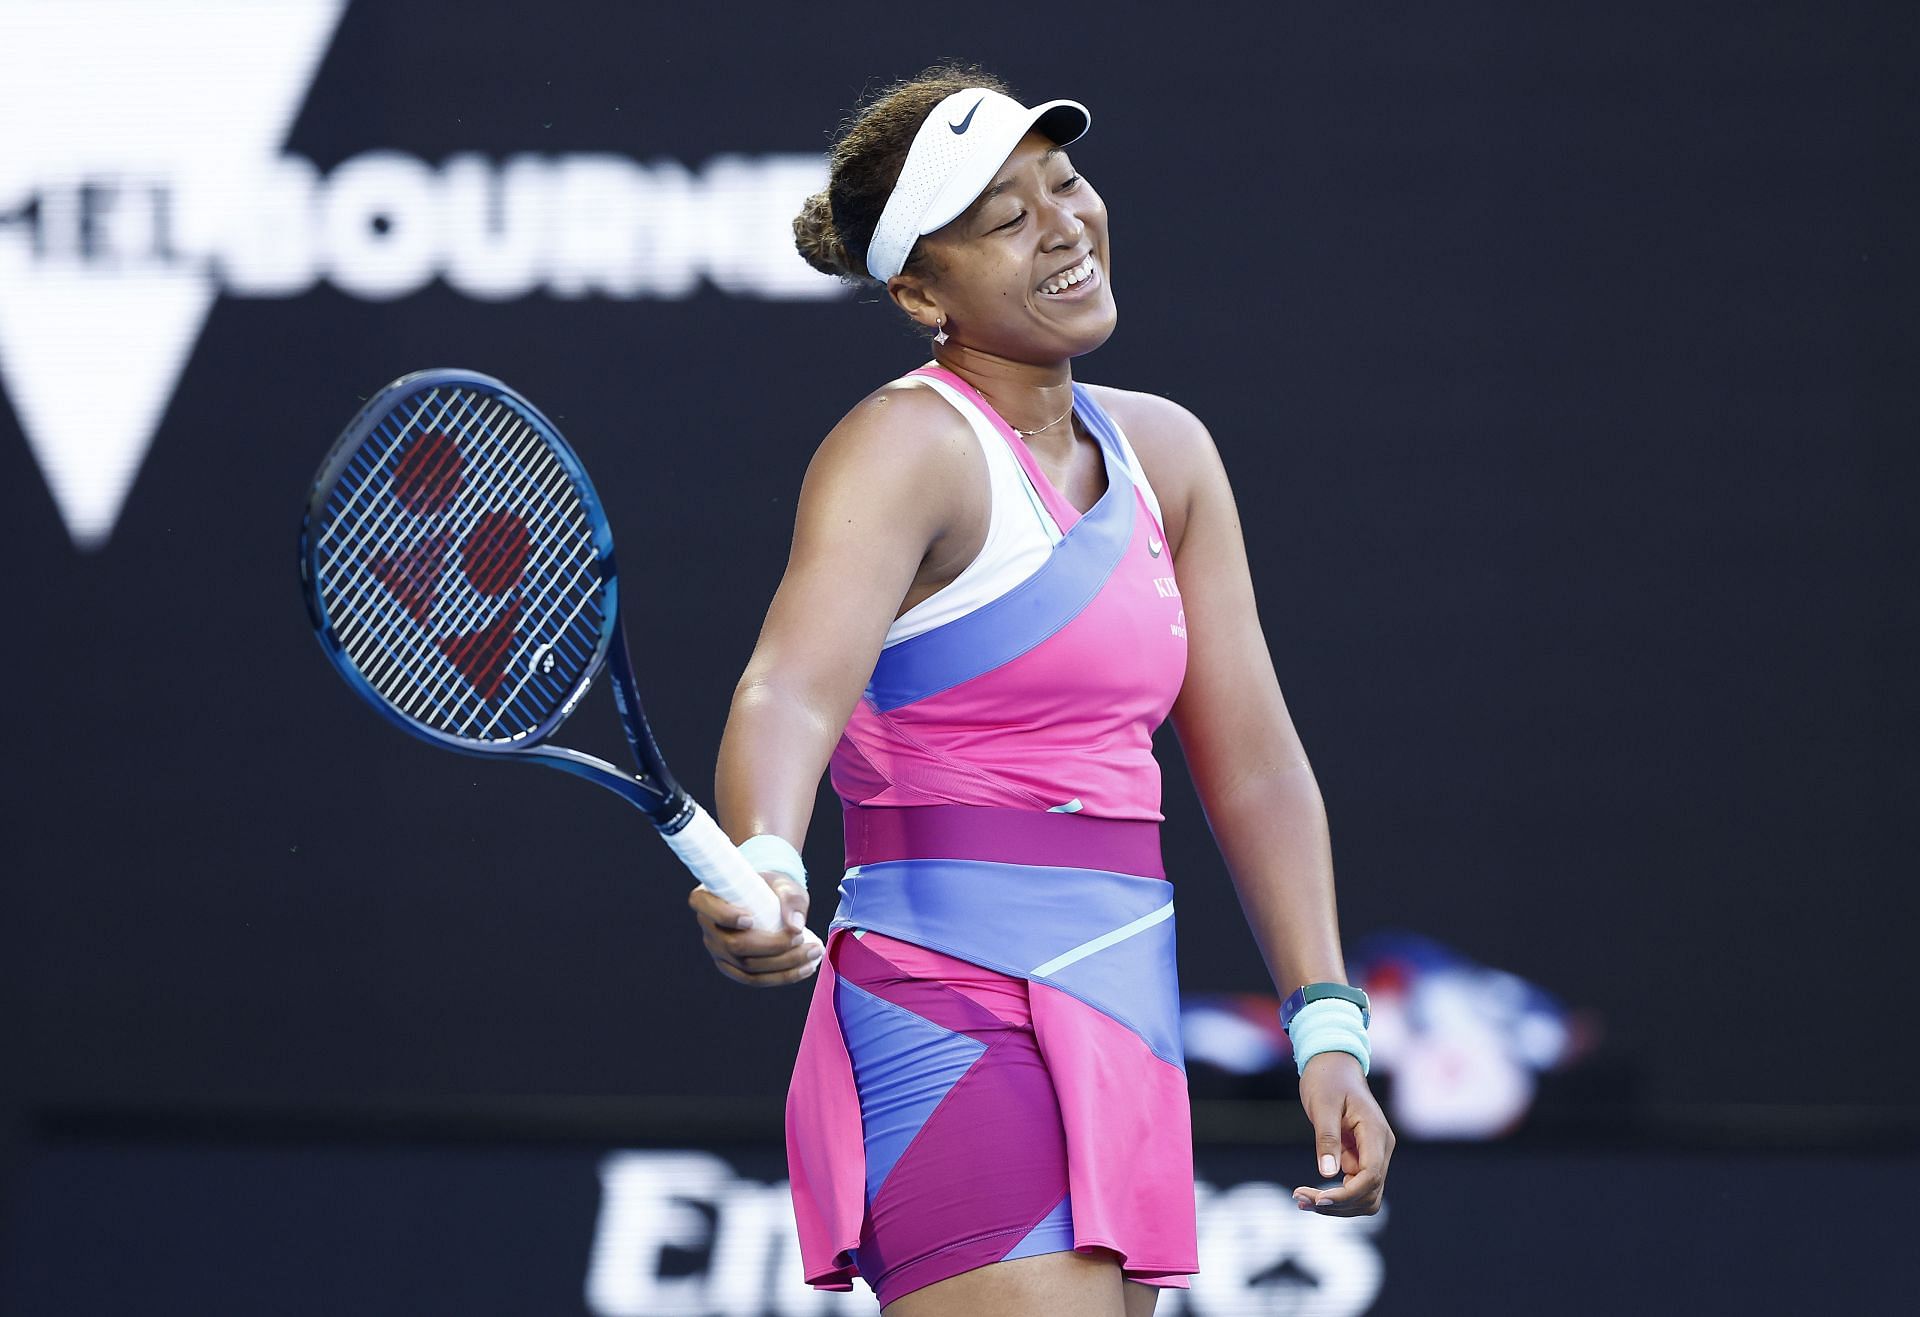 Naomi Osaka has received a wildcard for the WTA 1000 tournaments in Indian Wells and Miami